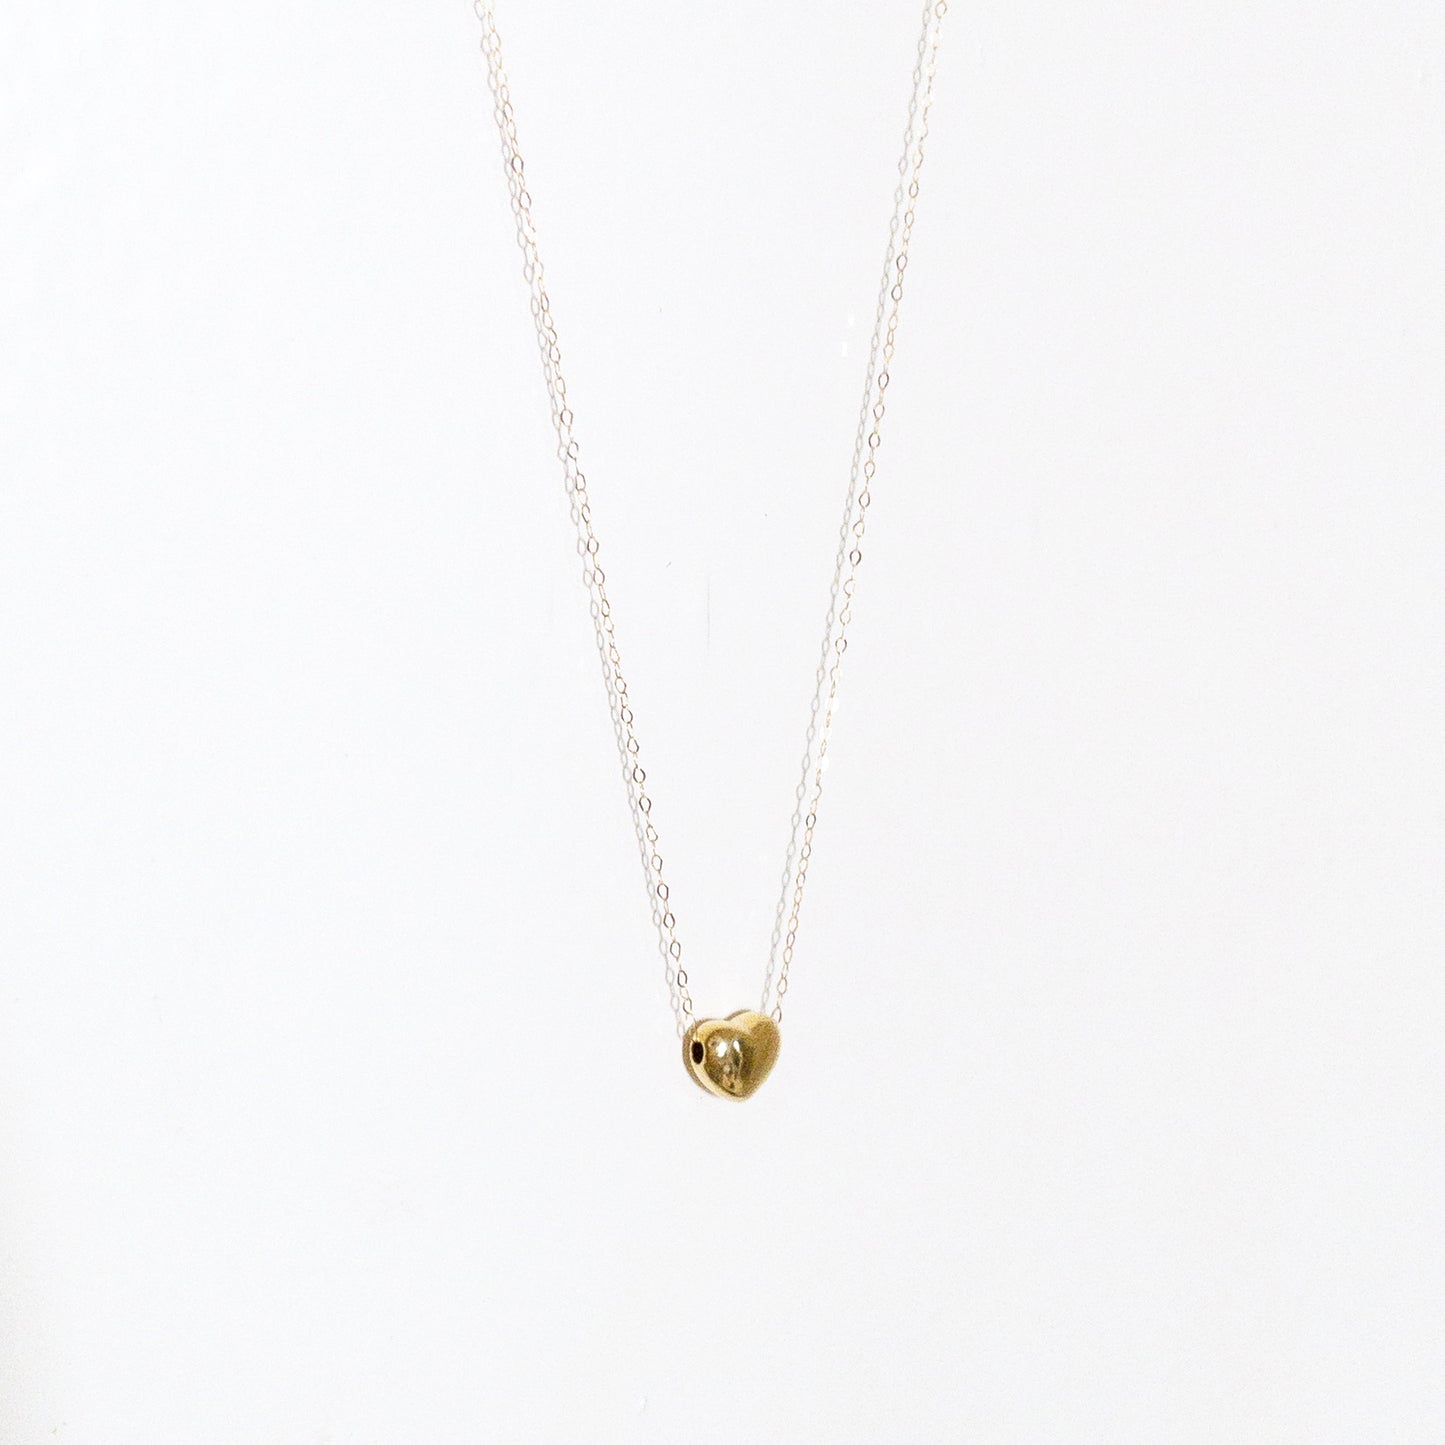 The Ultra Thin Heart Necklace in Solid Gold